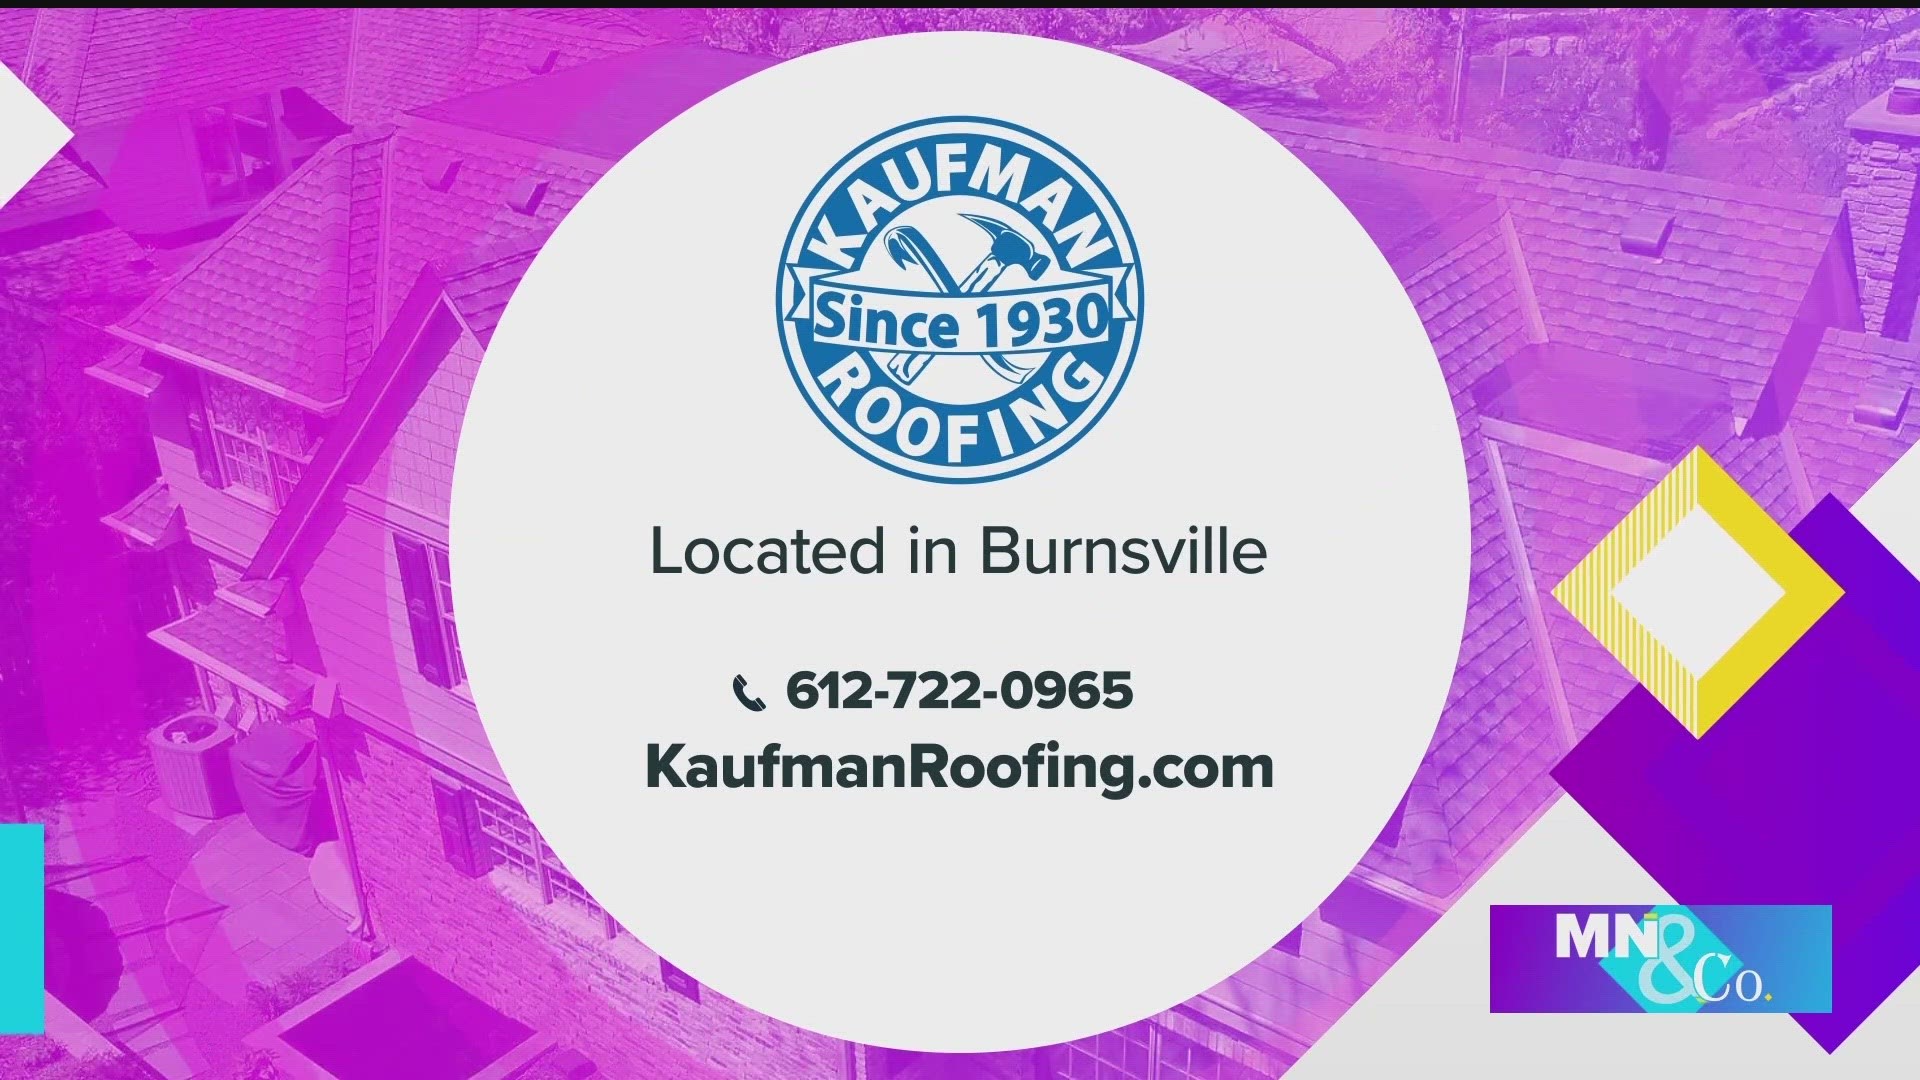 Kaufman Roofing joins Minnesota and Company to discuss how to identify damage and the process of getting a new roof.